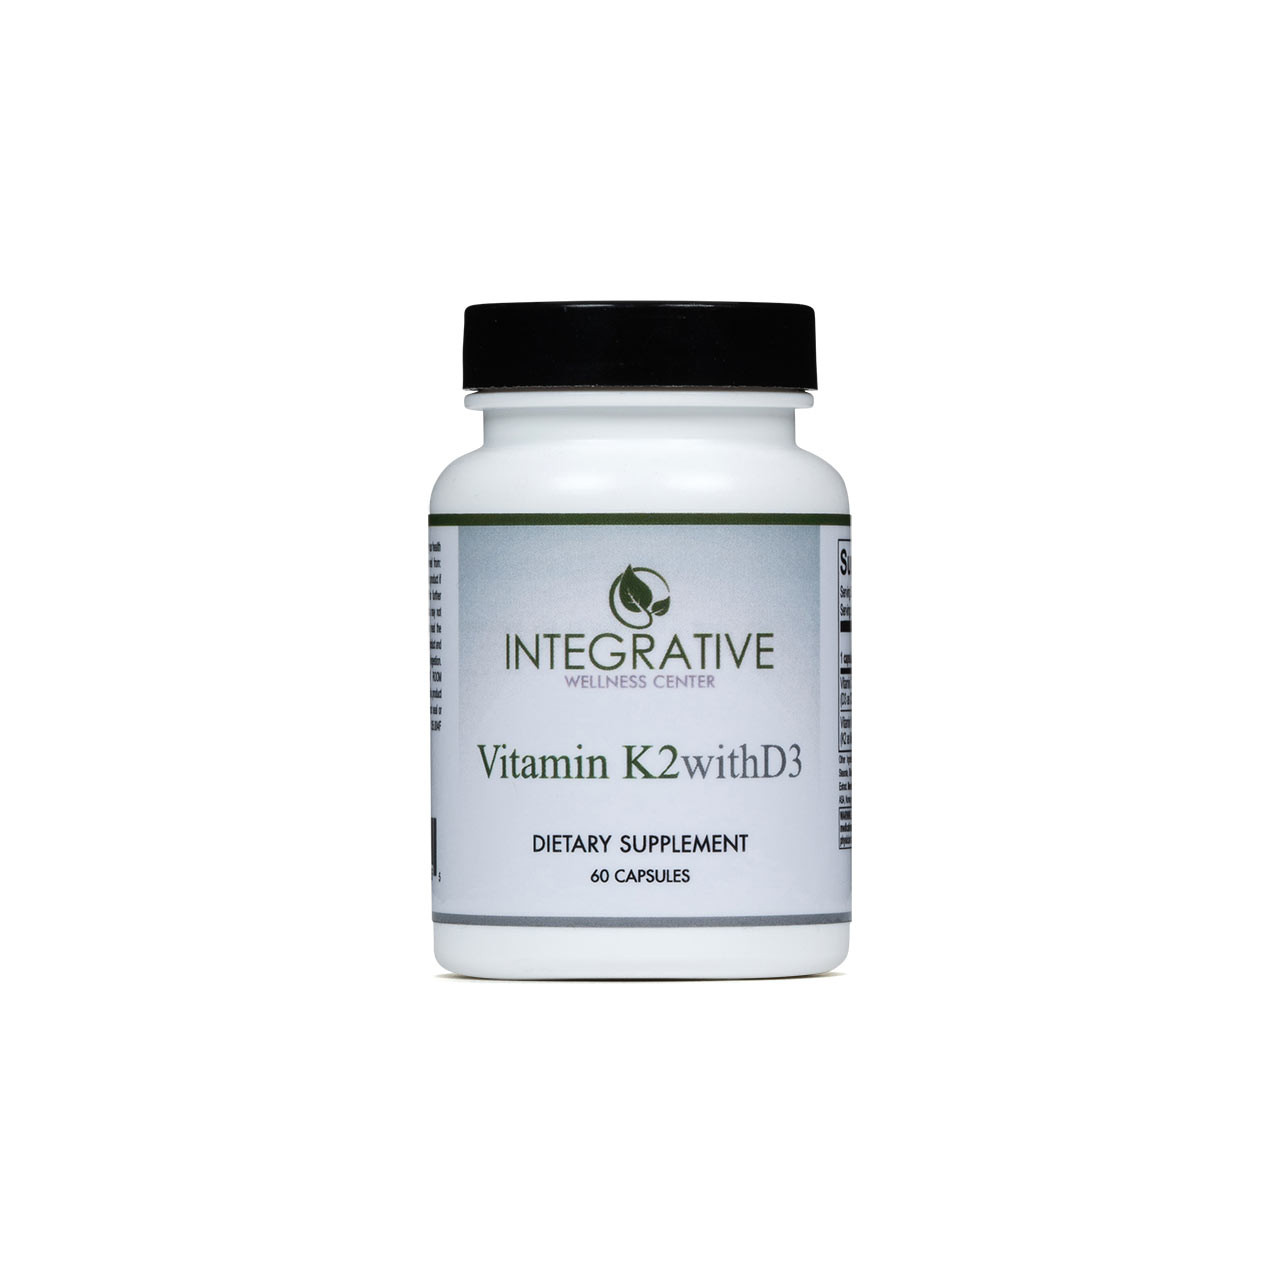 Vitamin K2 with D3 bottle